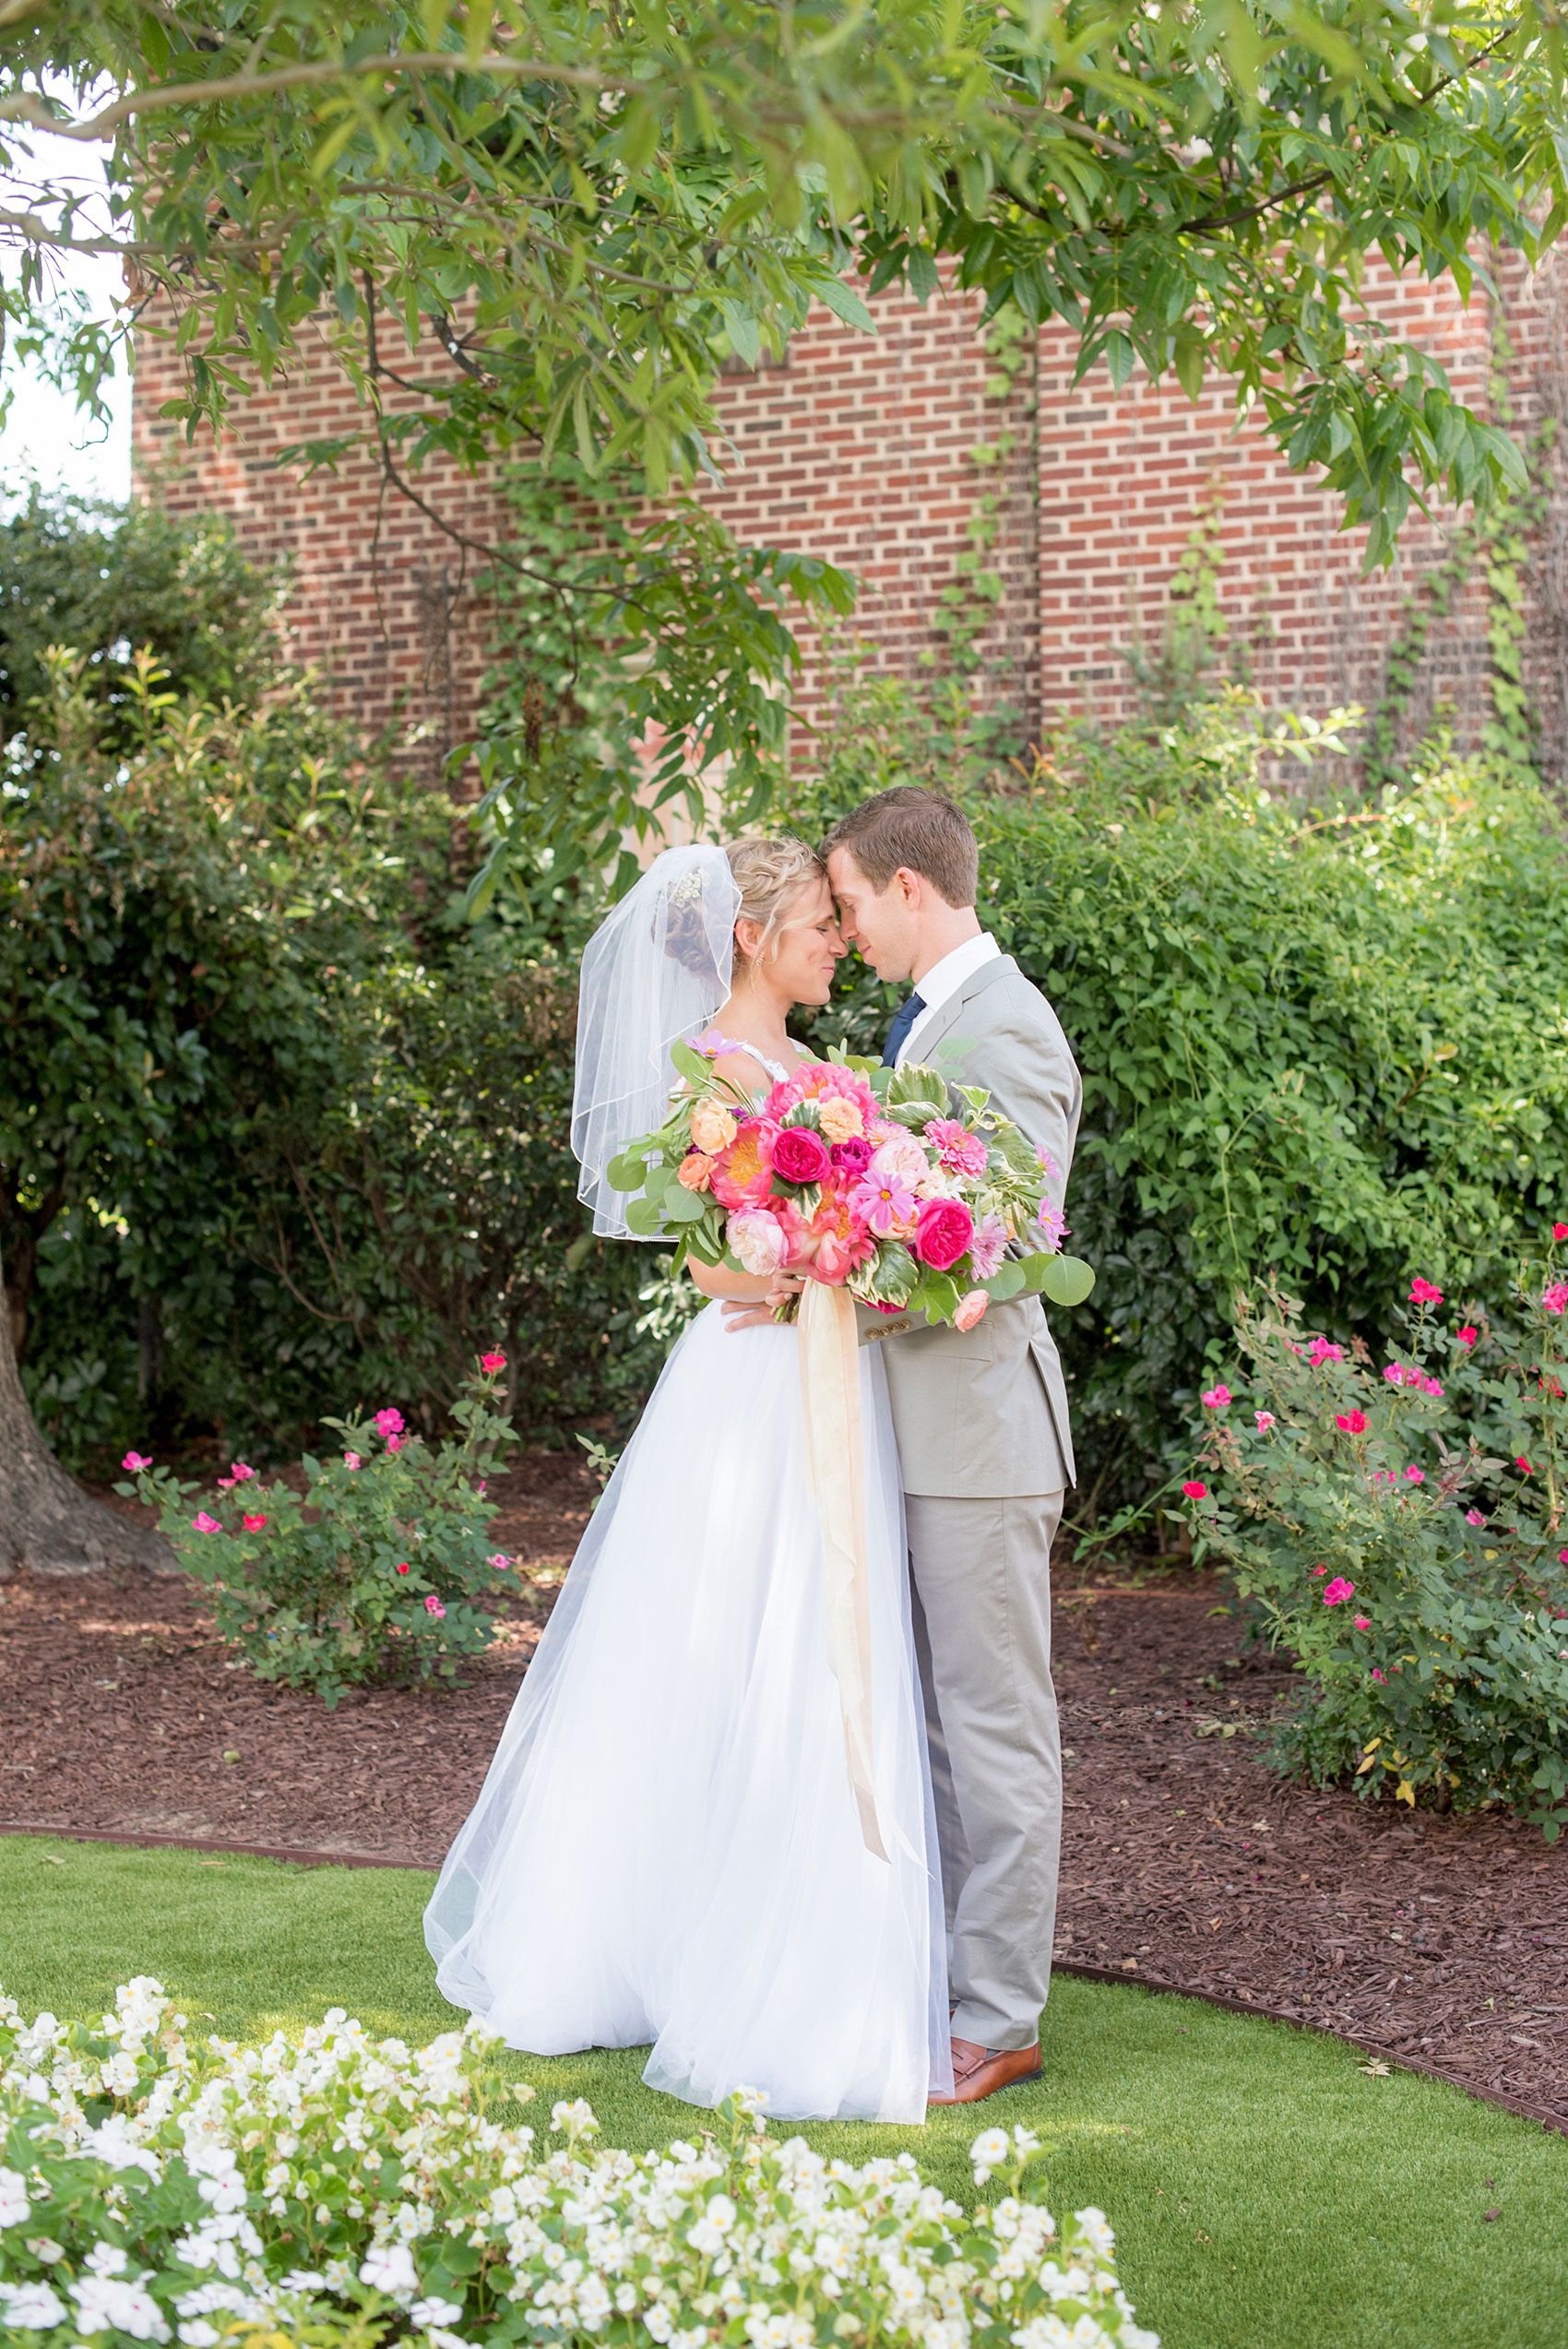 Mikkel Paige Photography wedding photos at The Merrimon-Wynne House in downtown Raleigh. The bride and groom with colorful bouquet and tulle skirt wedding dress.